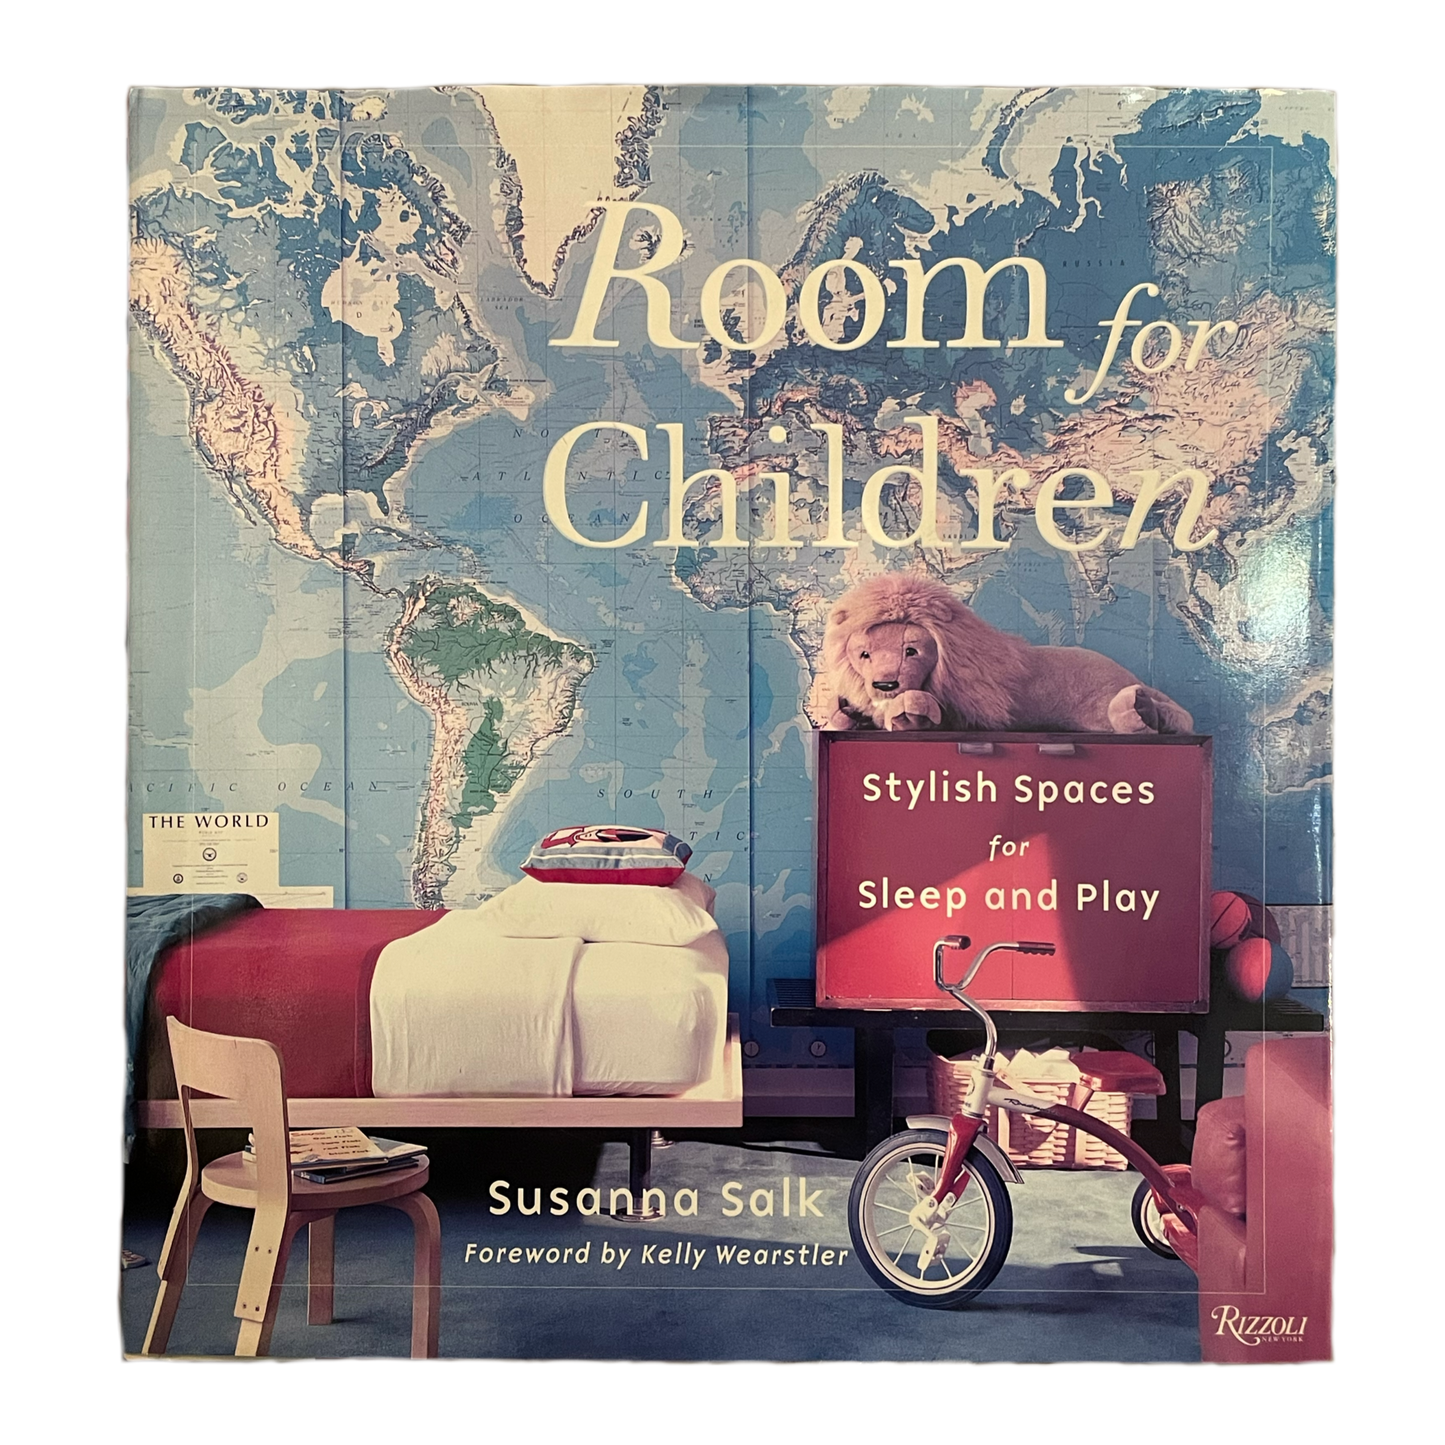 Room for Children: Stylish Spaces for Sleep and Play by Susanna Salk